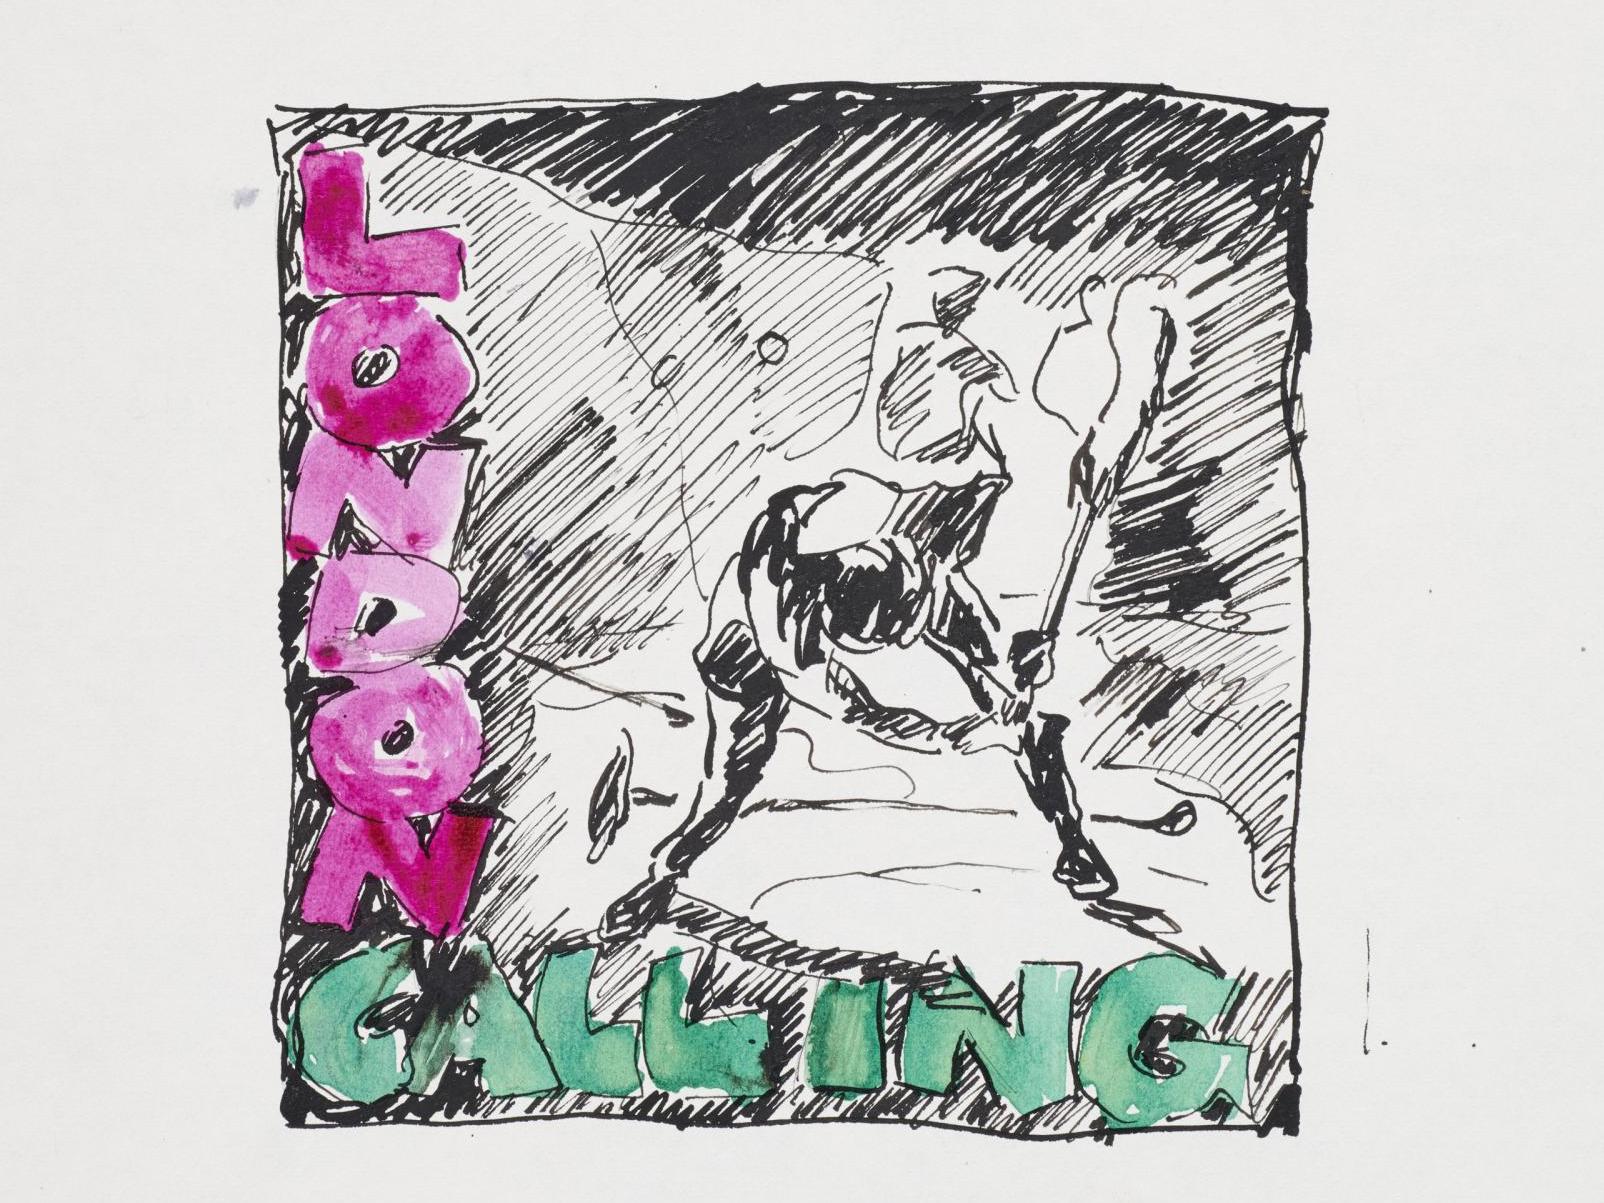 A 1979 preliminary sketch by Ray?Lowry for the ‘London Calling’ album art, on display at the Museum of London